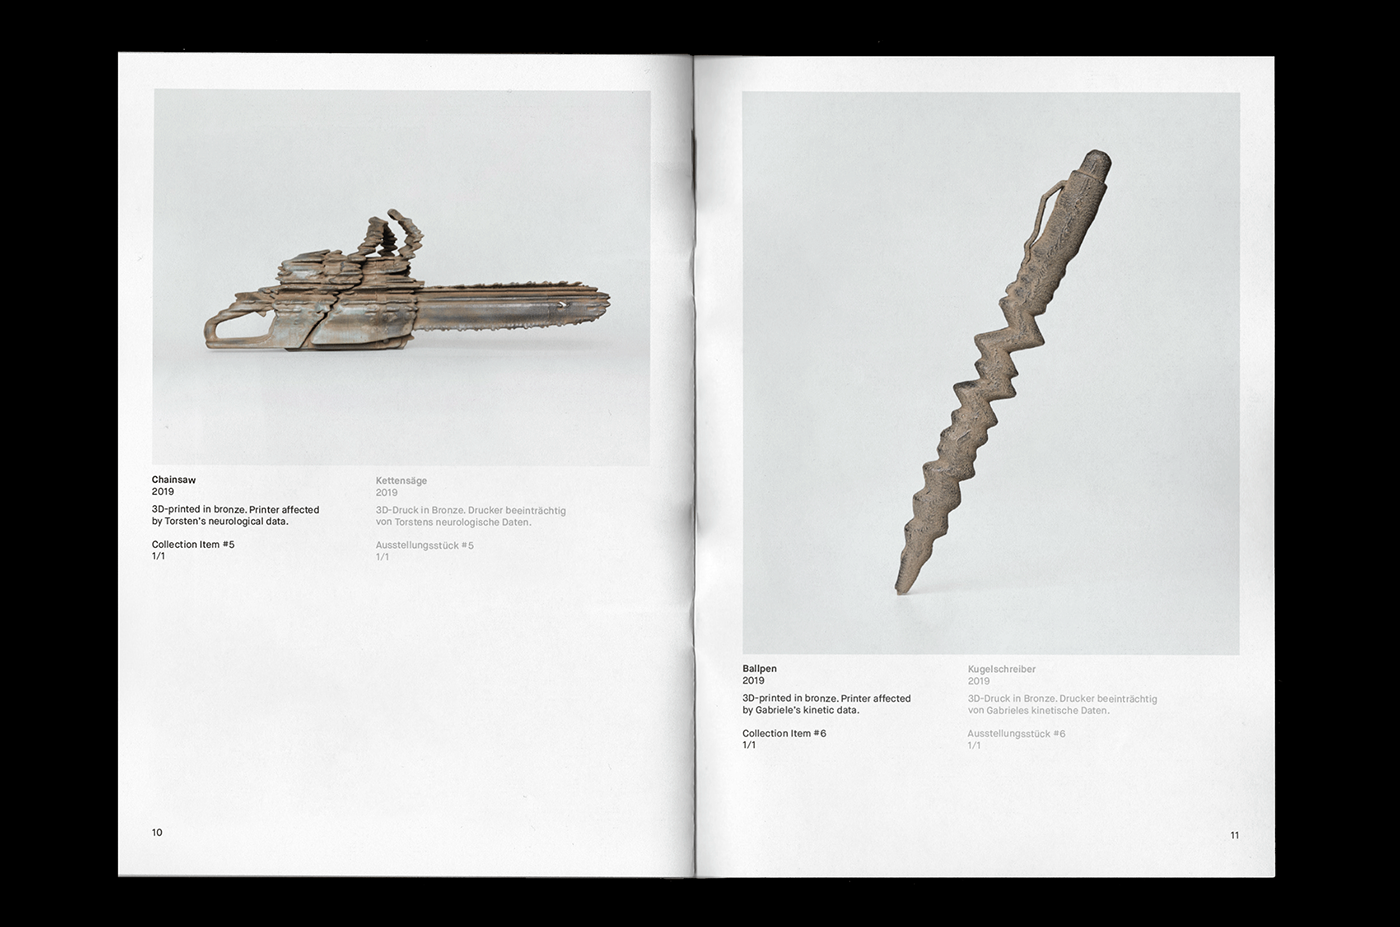 Catalogue inside design showing the art objects for the exhibition in Berlin.